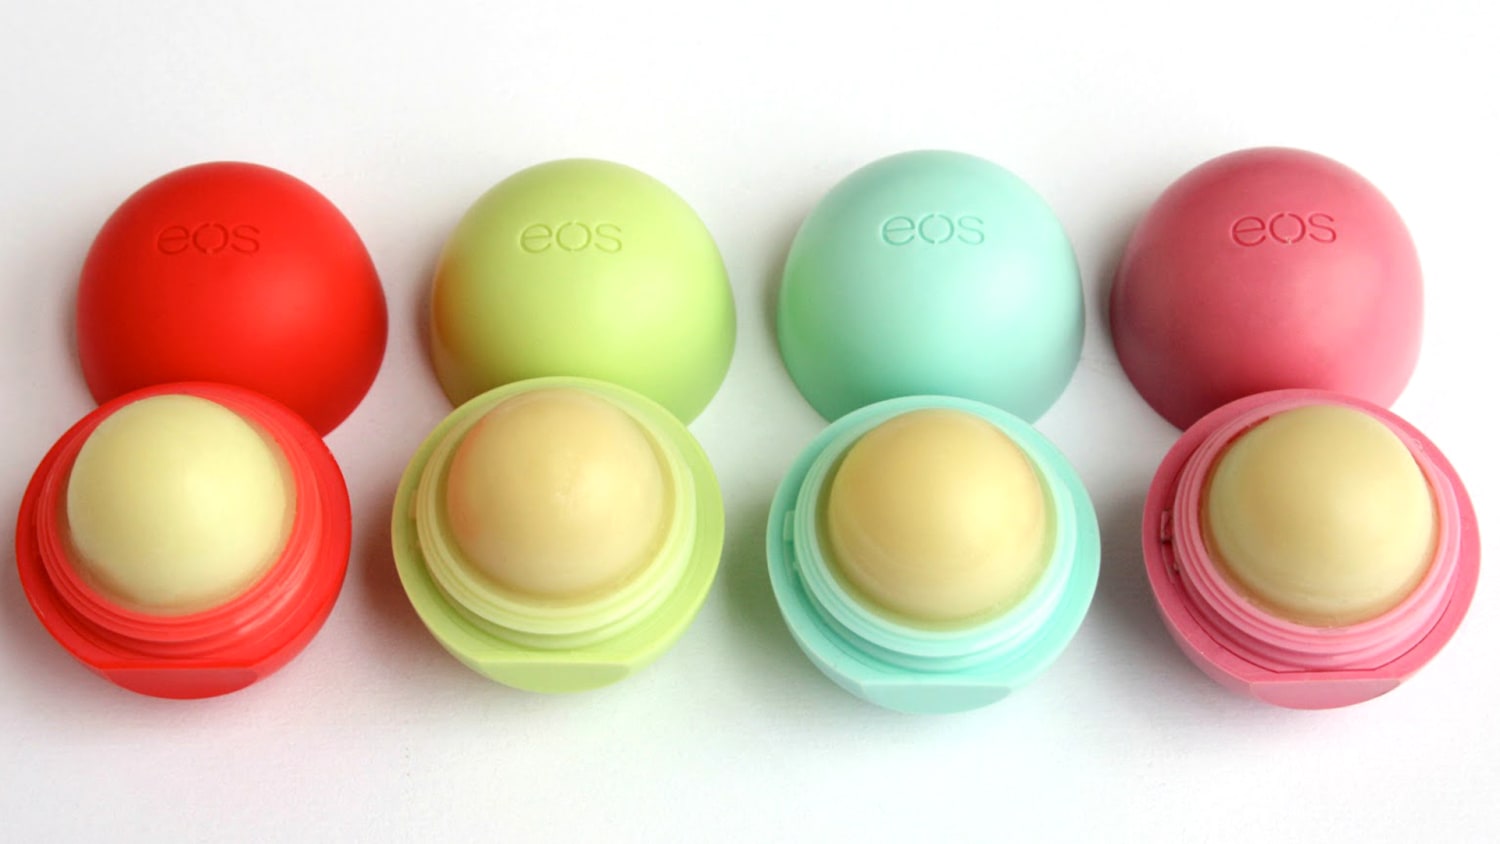 eos-lip-balm-caused-blisters-rash-lawsuit-claims-today